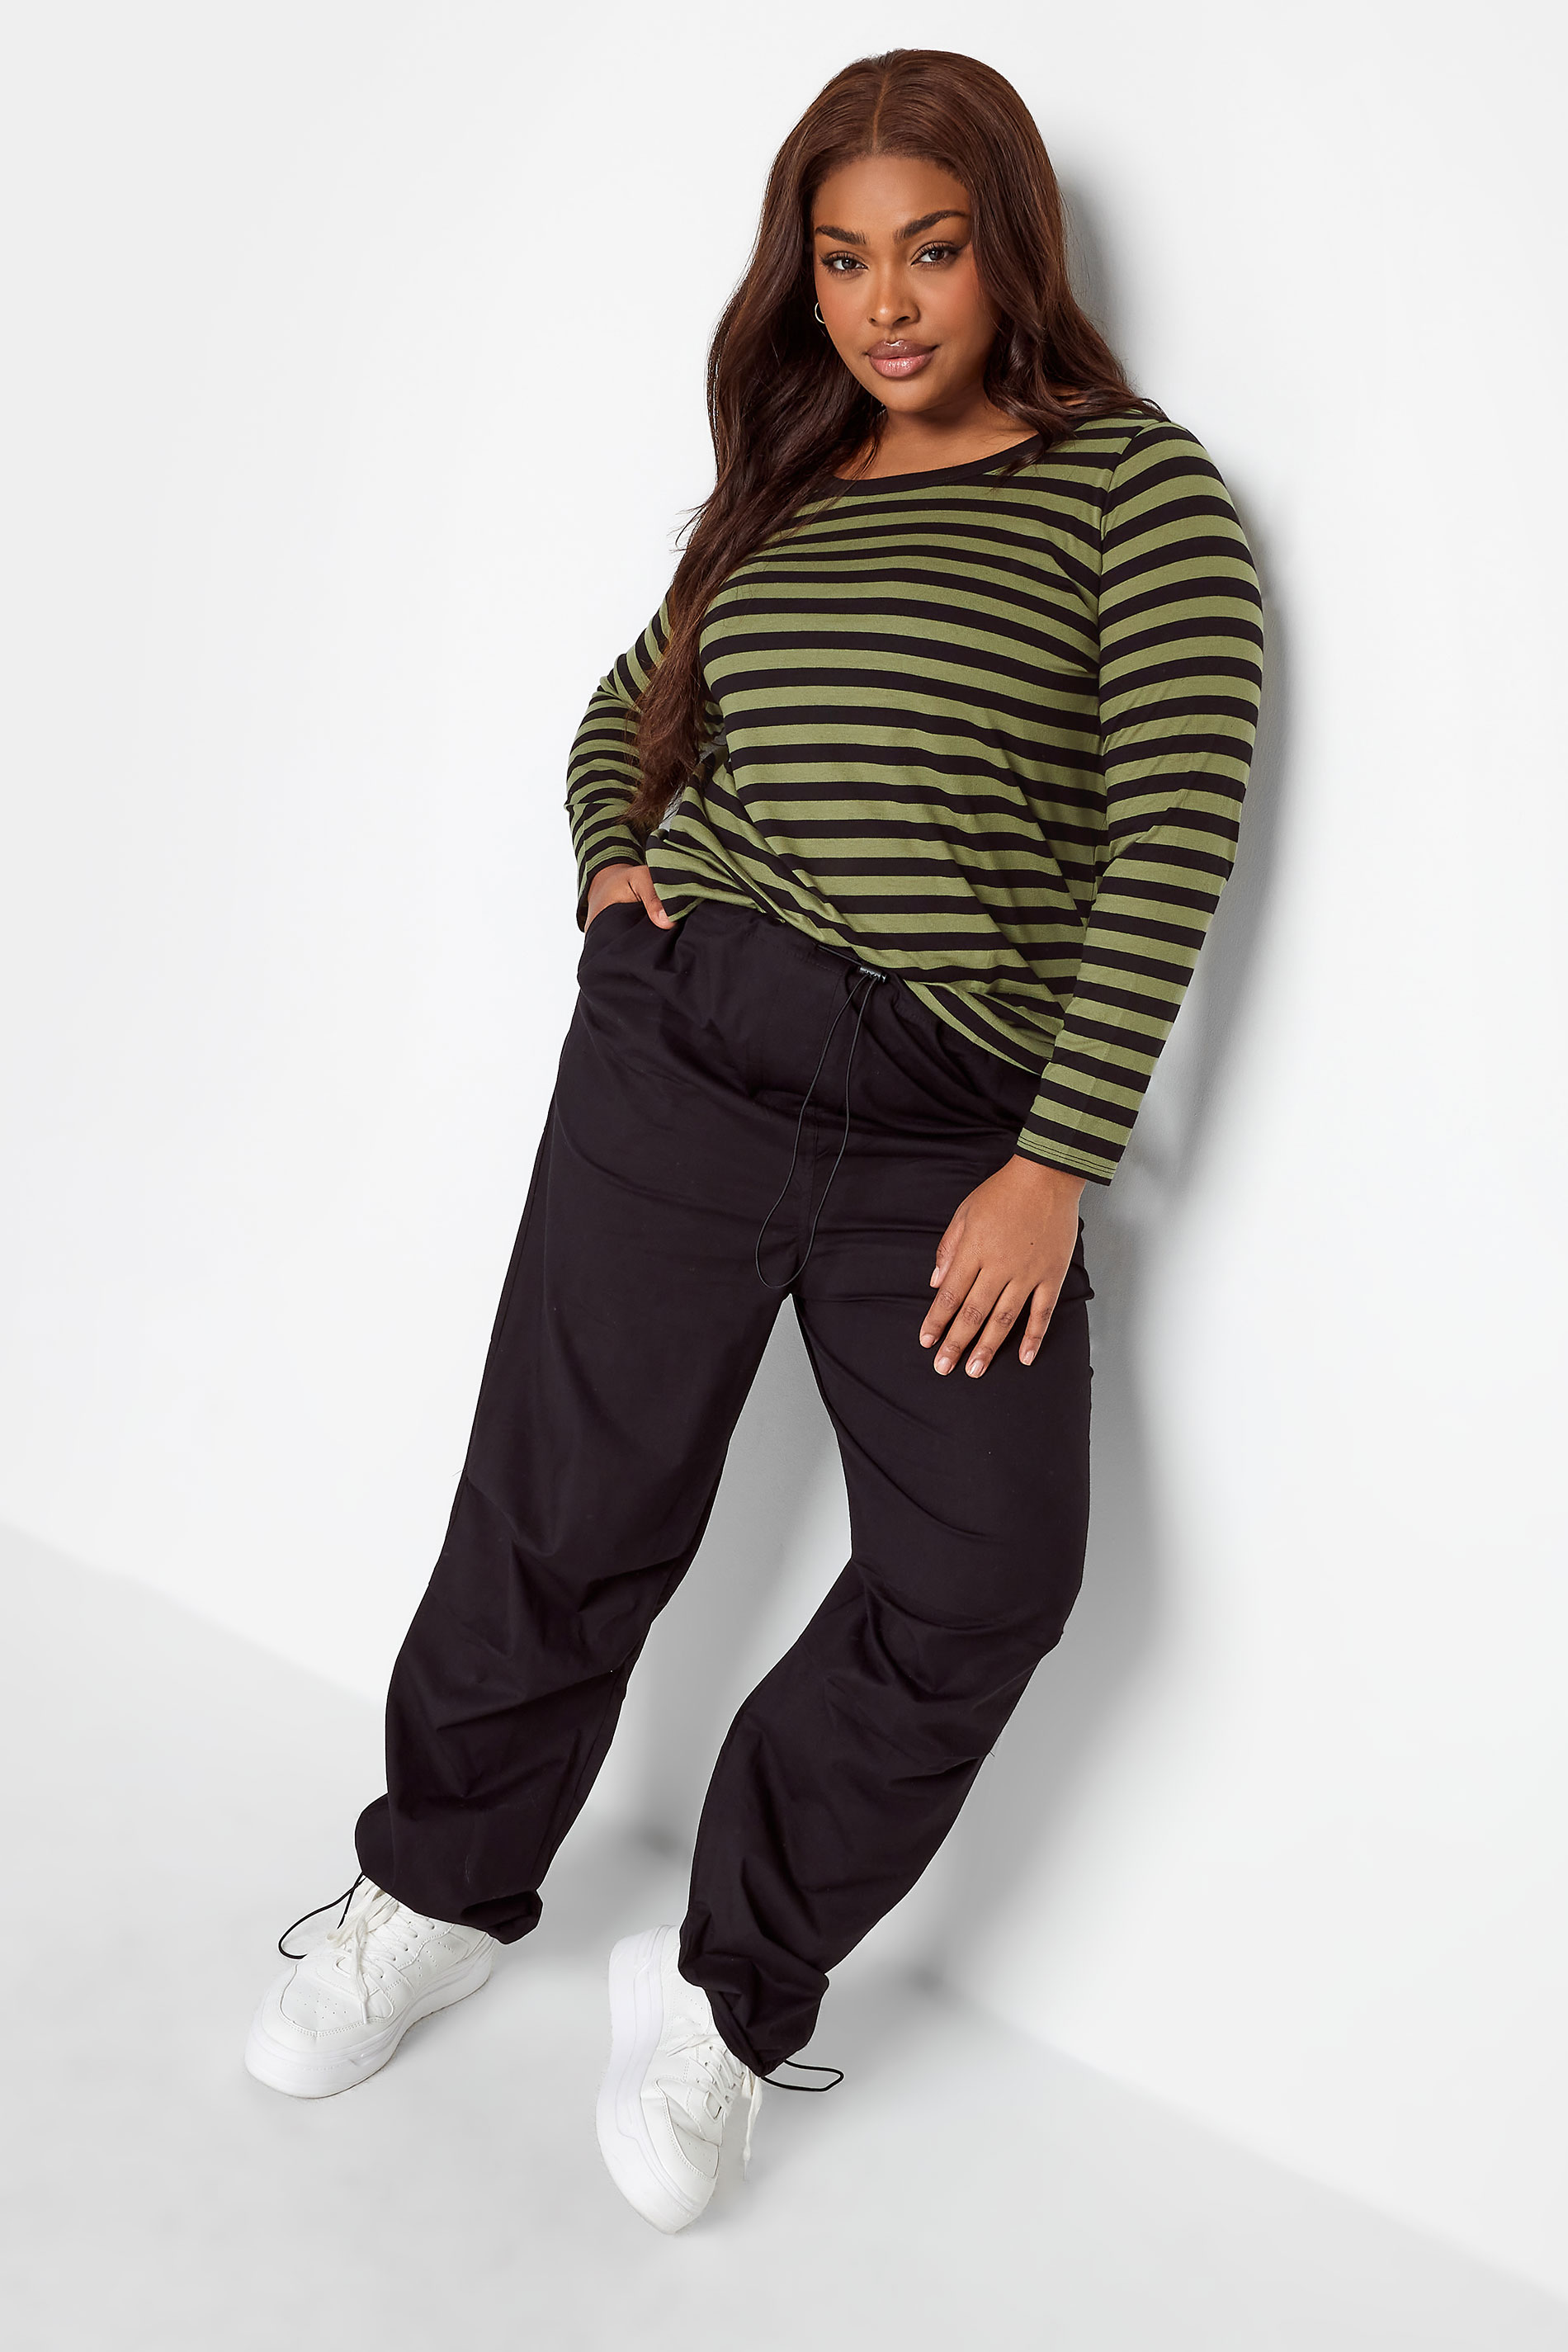 YOURS 2 PACK Plus Size Khaki Green & Beige Stripe Print Long Sleeve T-Shirts | Yours Clothing 3